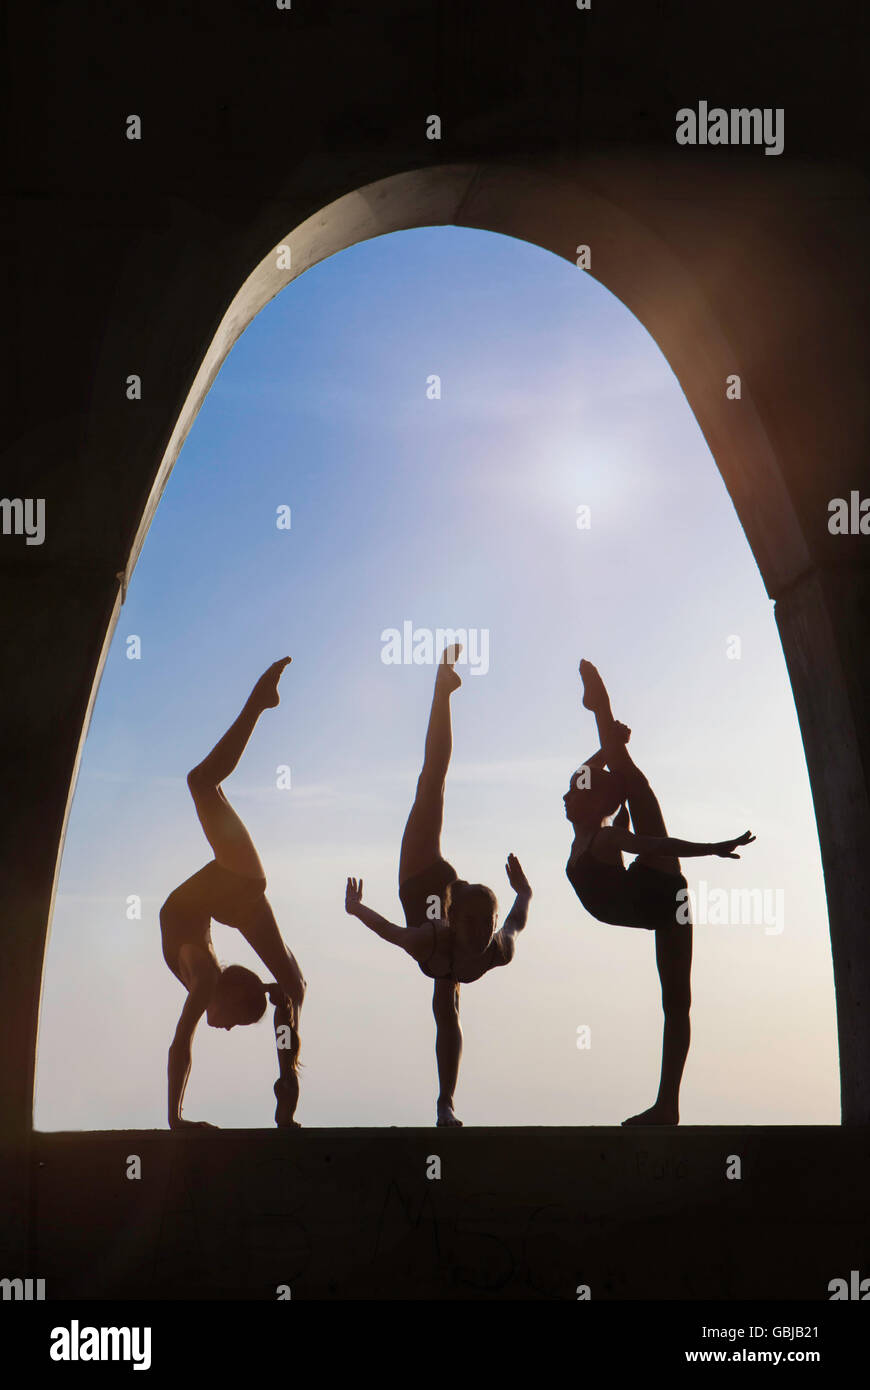 gymnasts outdoor silhouette Stock Photo